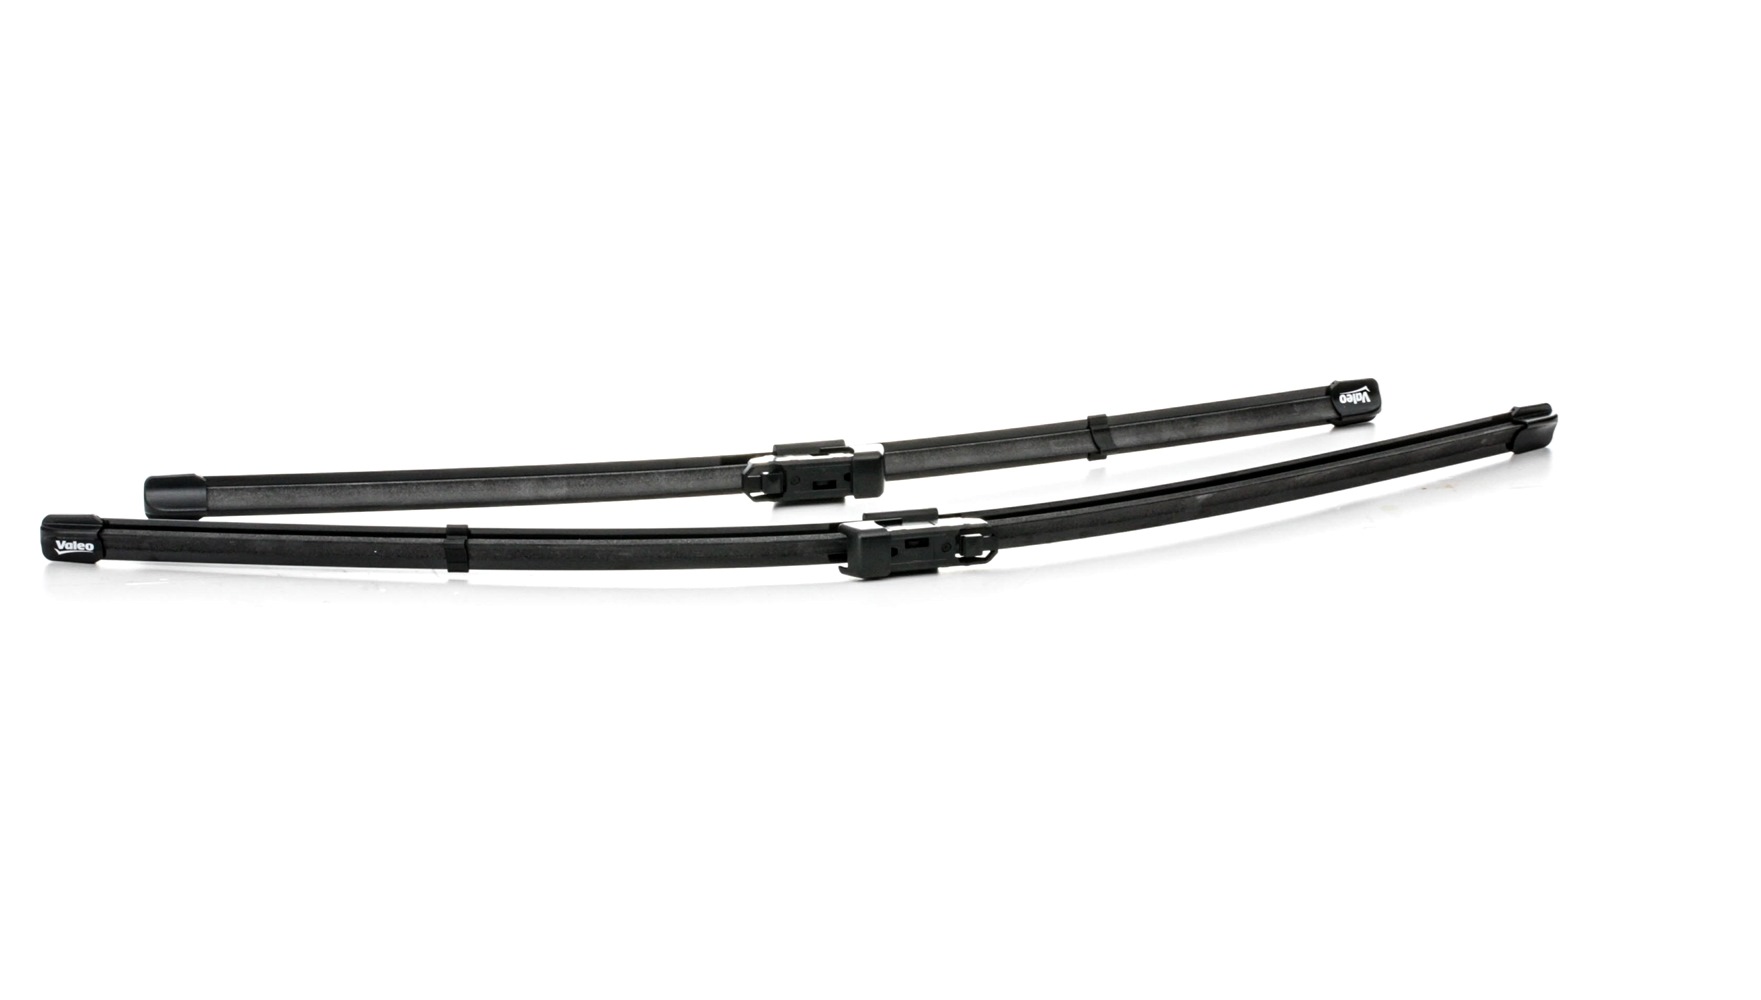 VALEO SILENCIO X.TRM 577892 Wiper blade 630, 500 mm Front, Beam, with spoiler, for left-hand drive vehicles